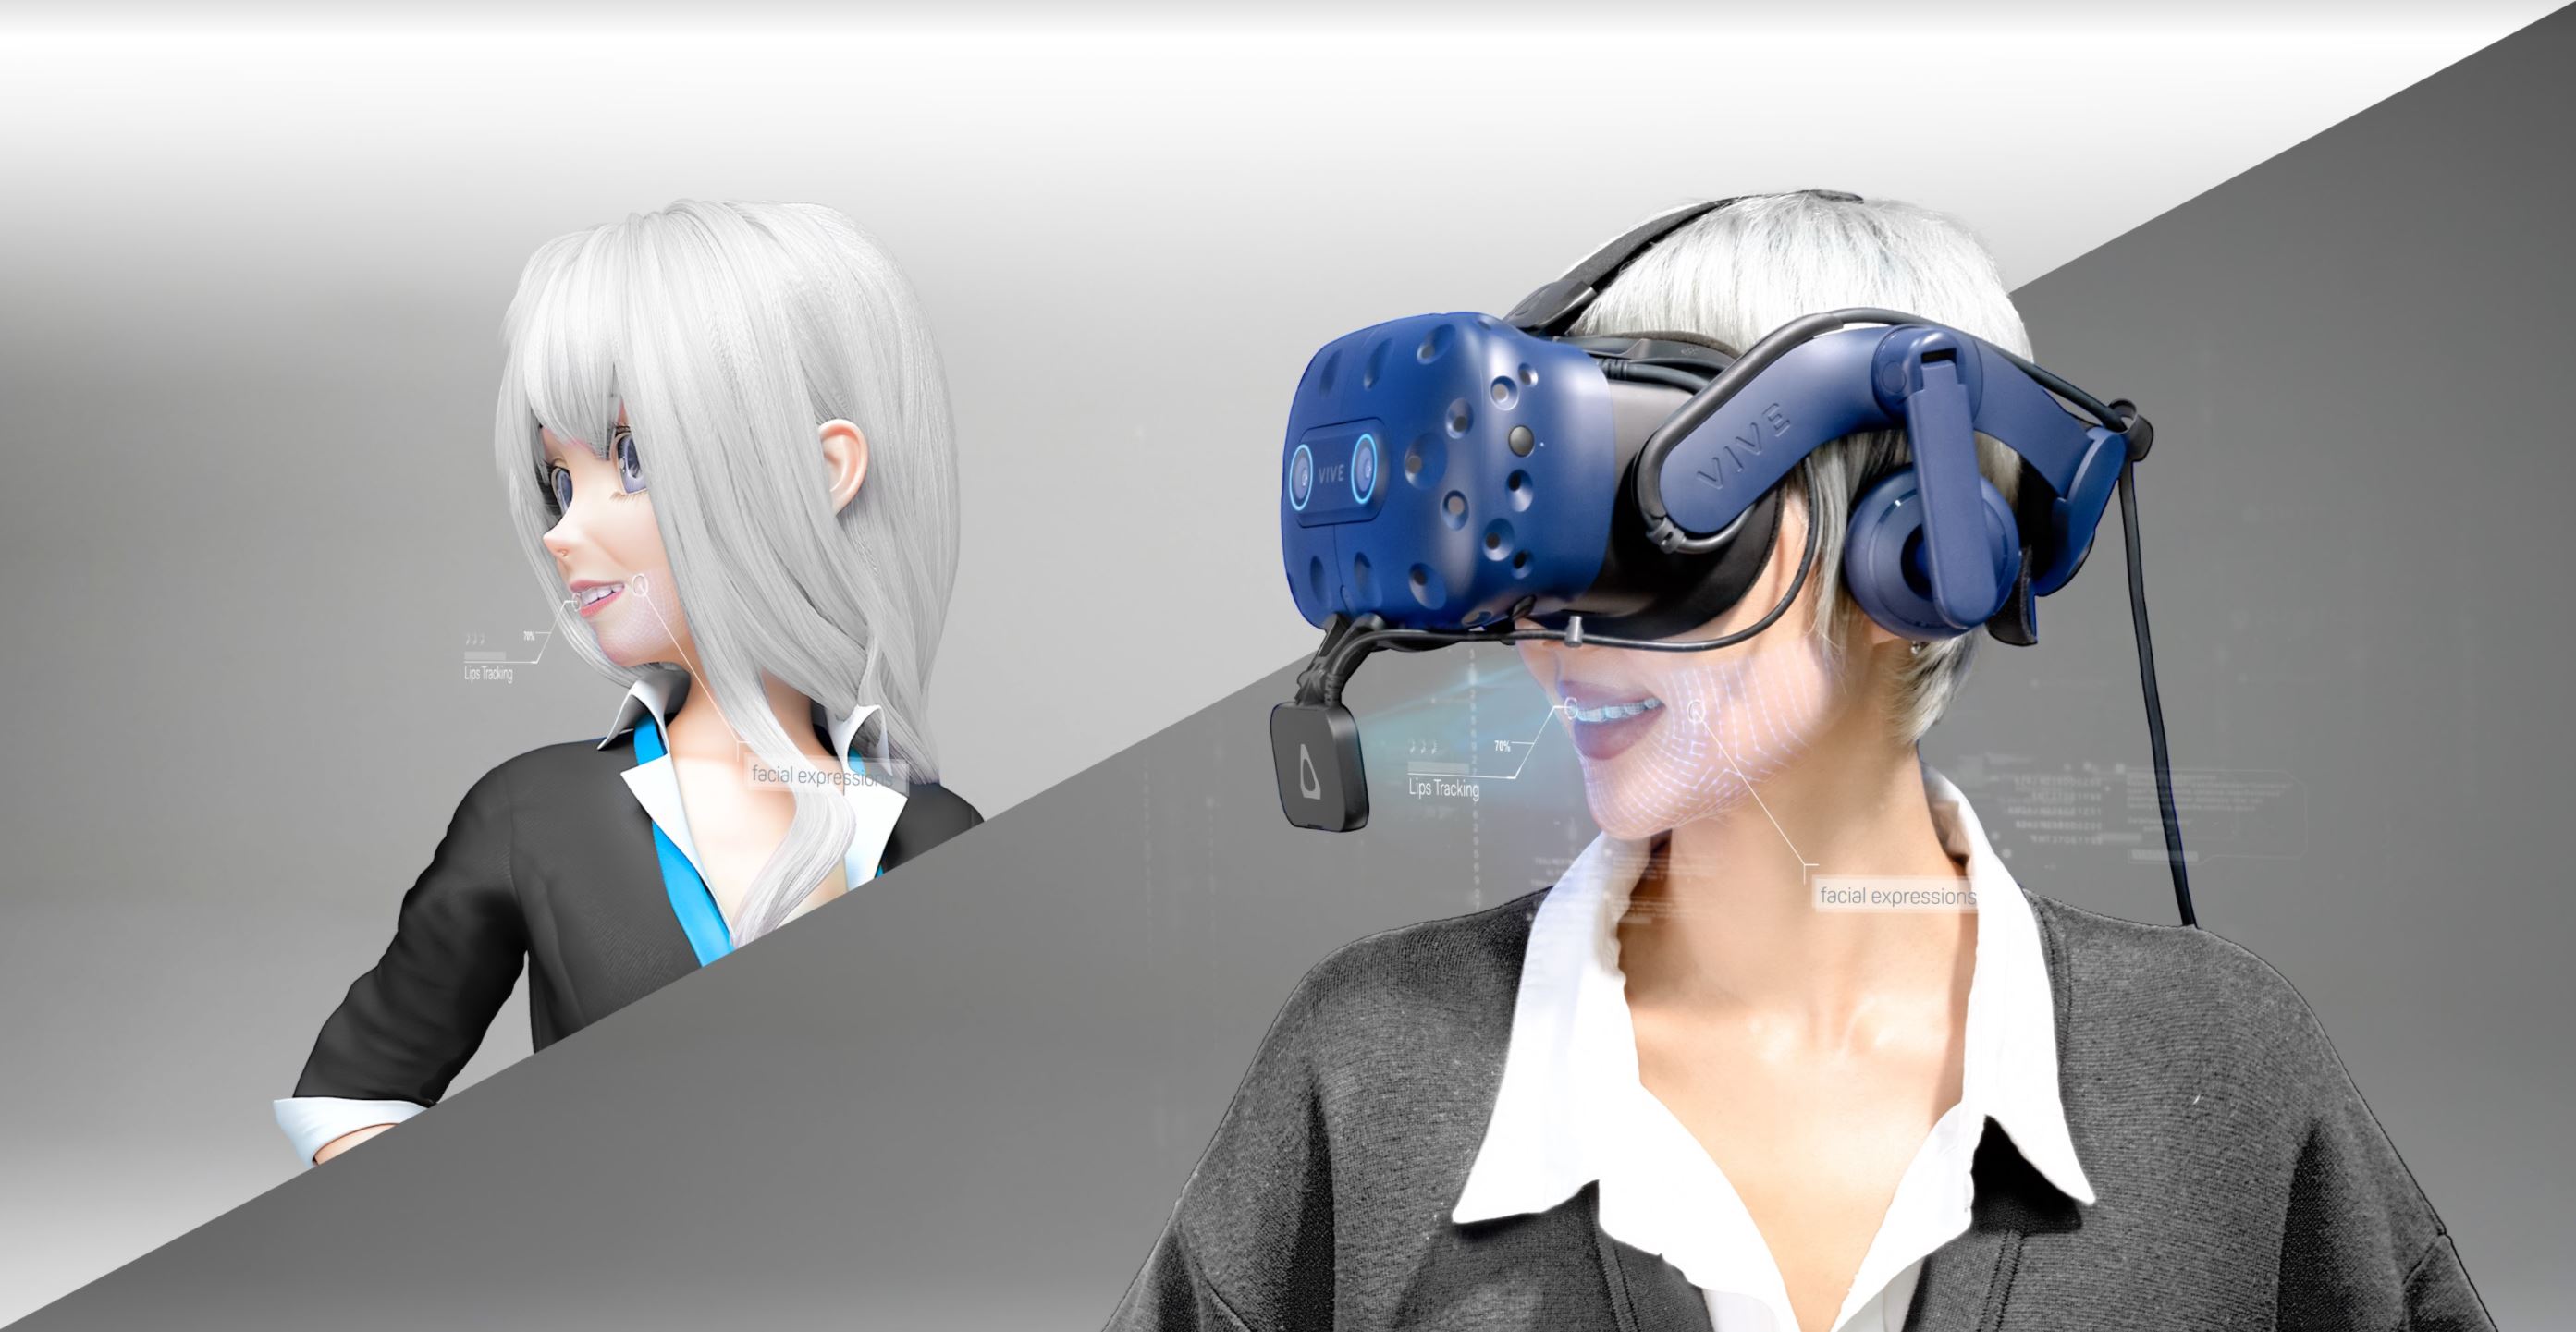 New HTC VIVE trackers announced for facial and body movements | GBAtemp.net  - The Independent Video Game Community